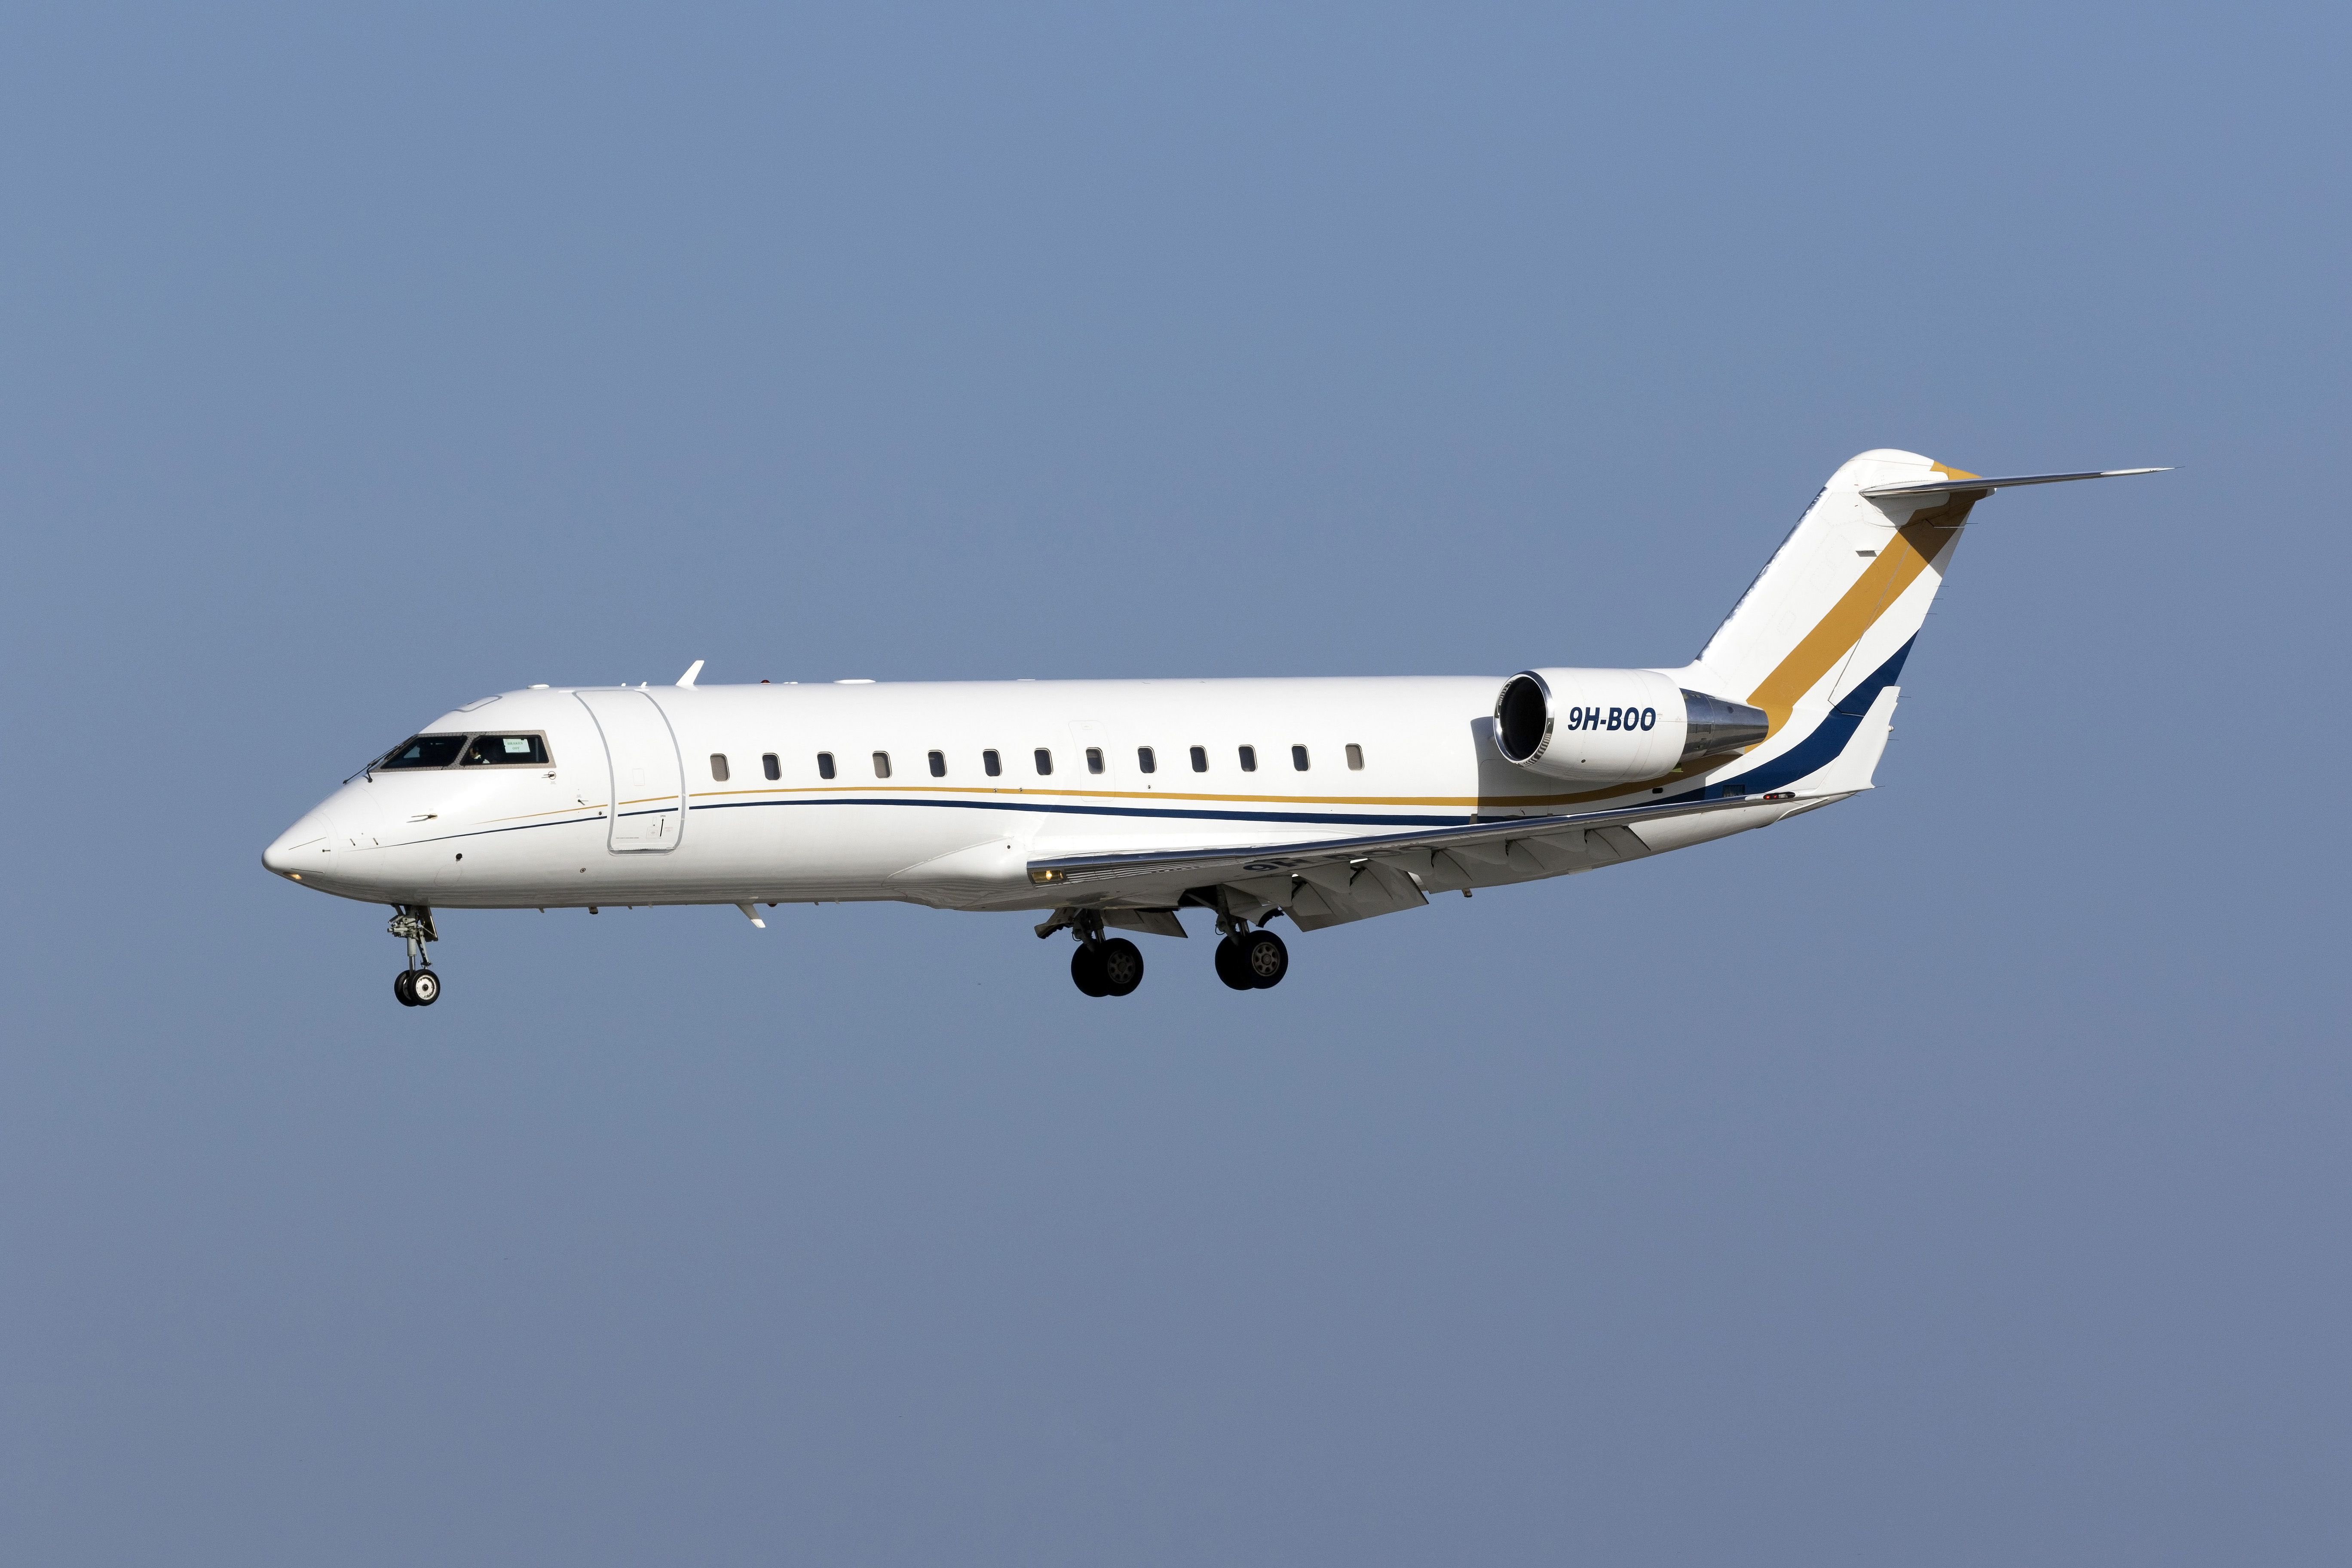 A Bombardier Challenger 850 flying in the sky.